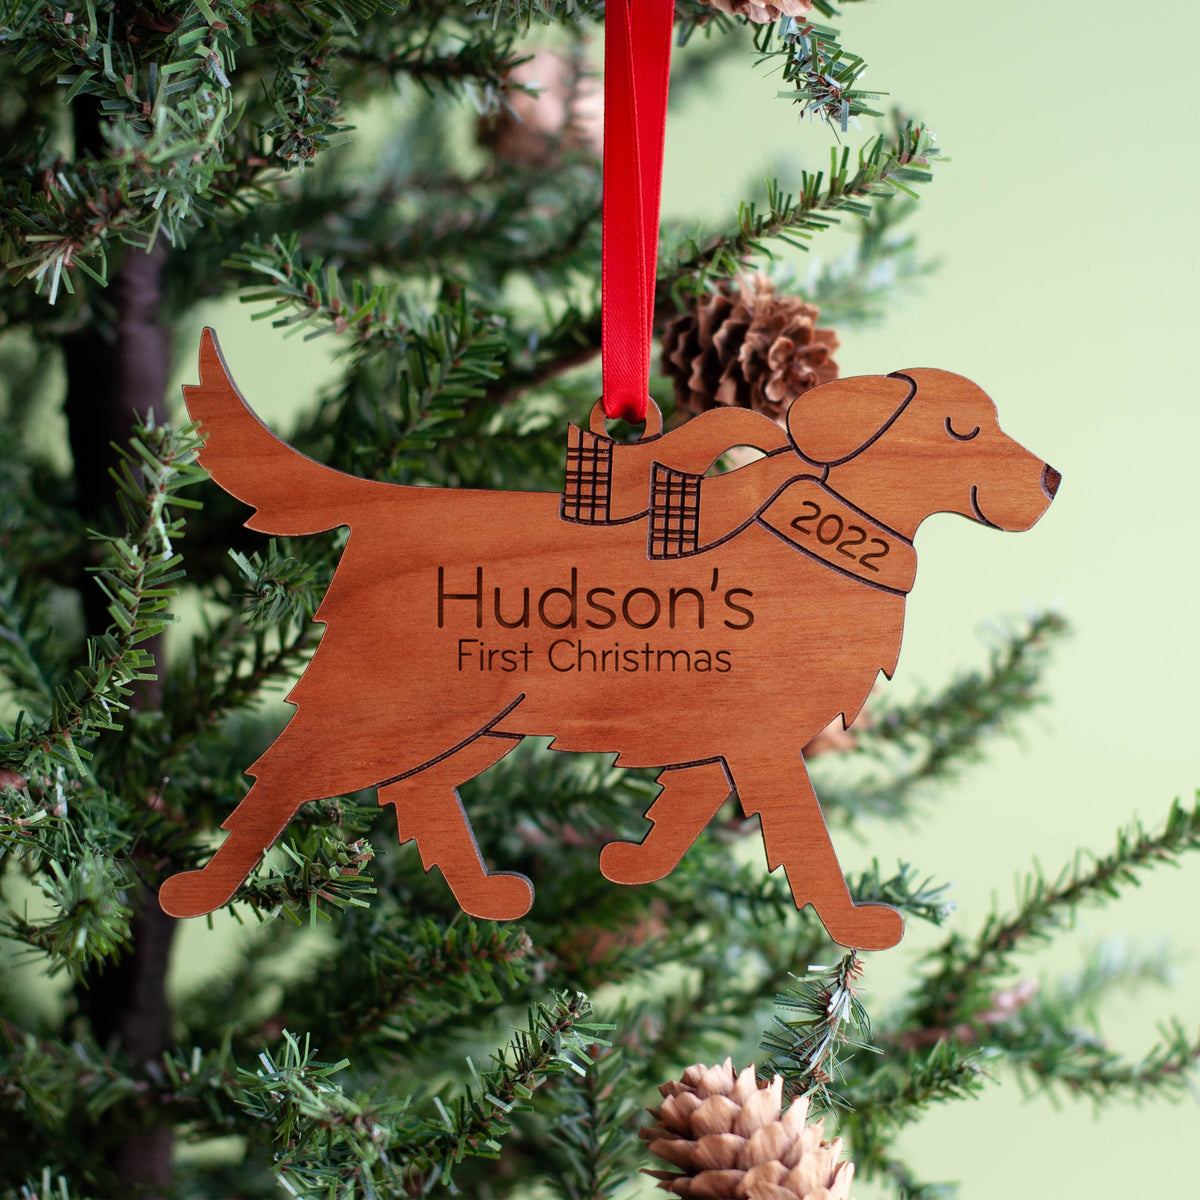 Golden Retriever Wooden Christmas Ornament - Personalized